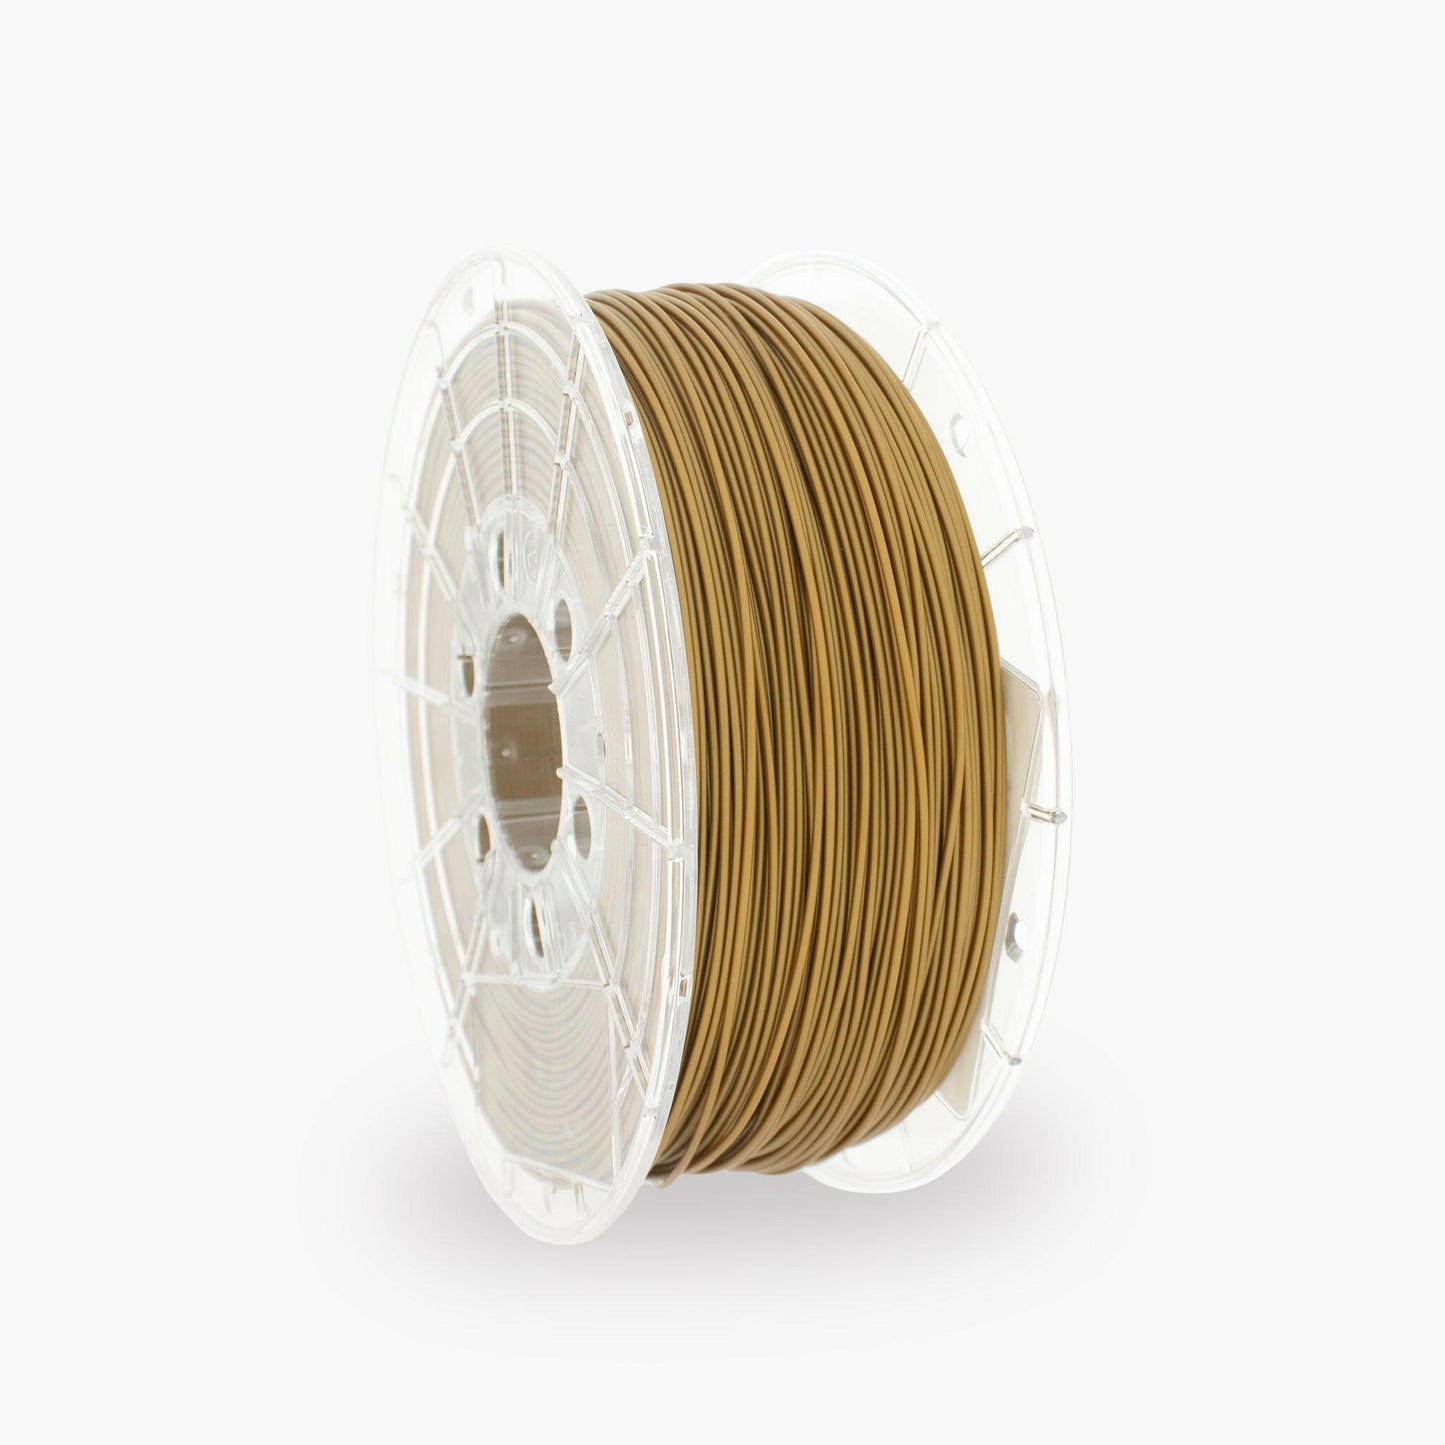 Pearl Gold PLA 3D Printer Filament with a diameter of 1.75mm on a 1KG Spool.